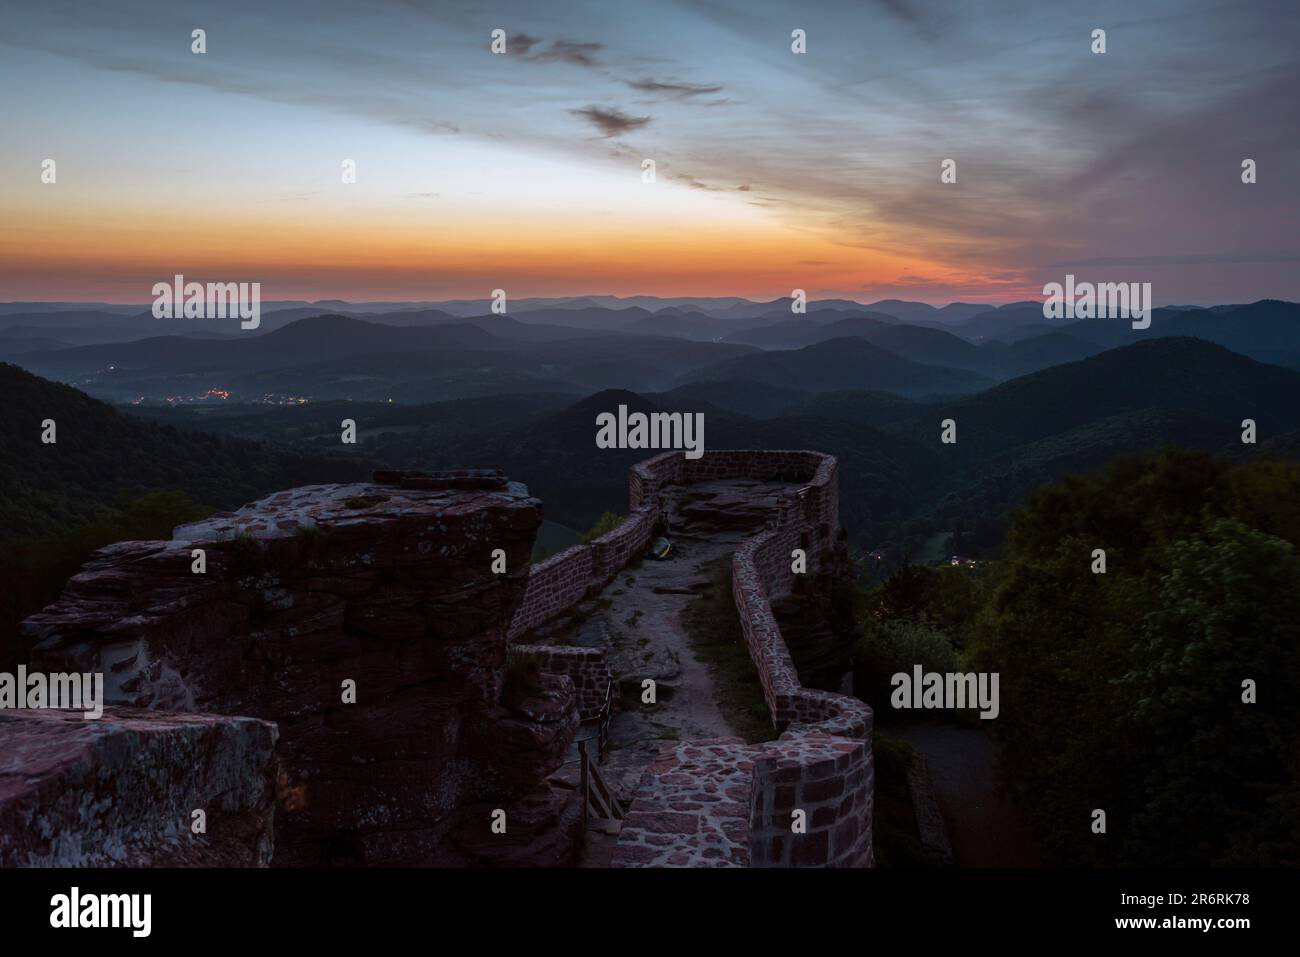 Moody dawn over Wegelnburg castle ruin, sandstone rocks and the forests of the Palatinate Mountains, Rhineland-Palatinate, Germany Stock Photo